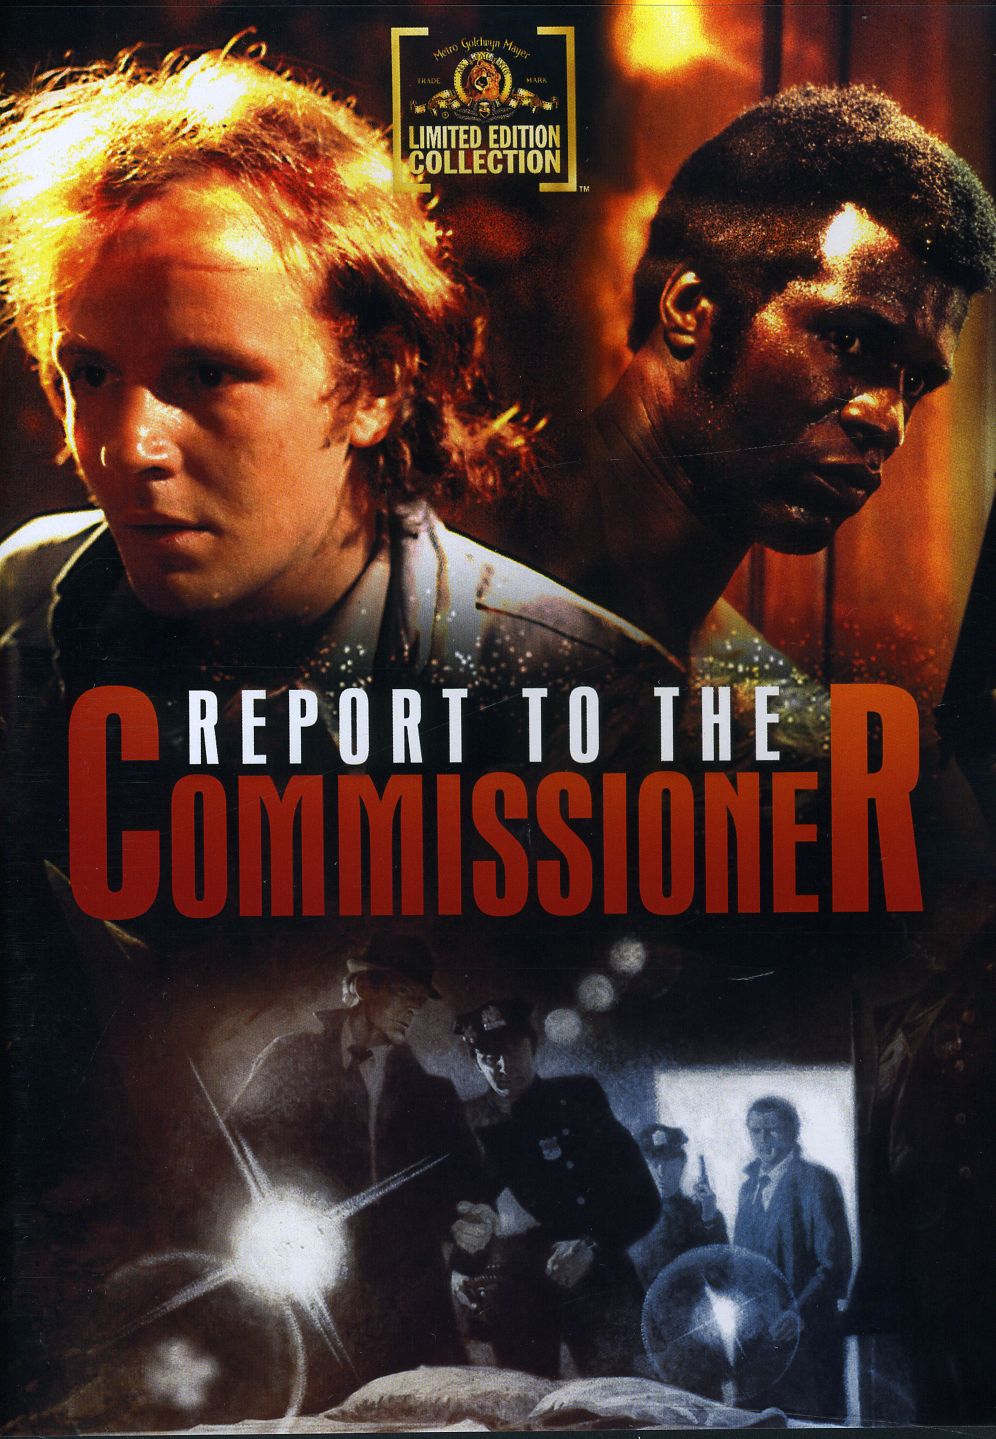 REPORT TO THE COMMISSIONER / (MOD MONO WS)